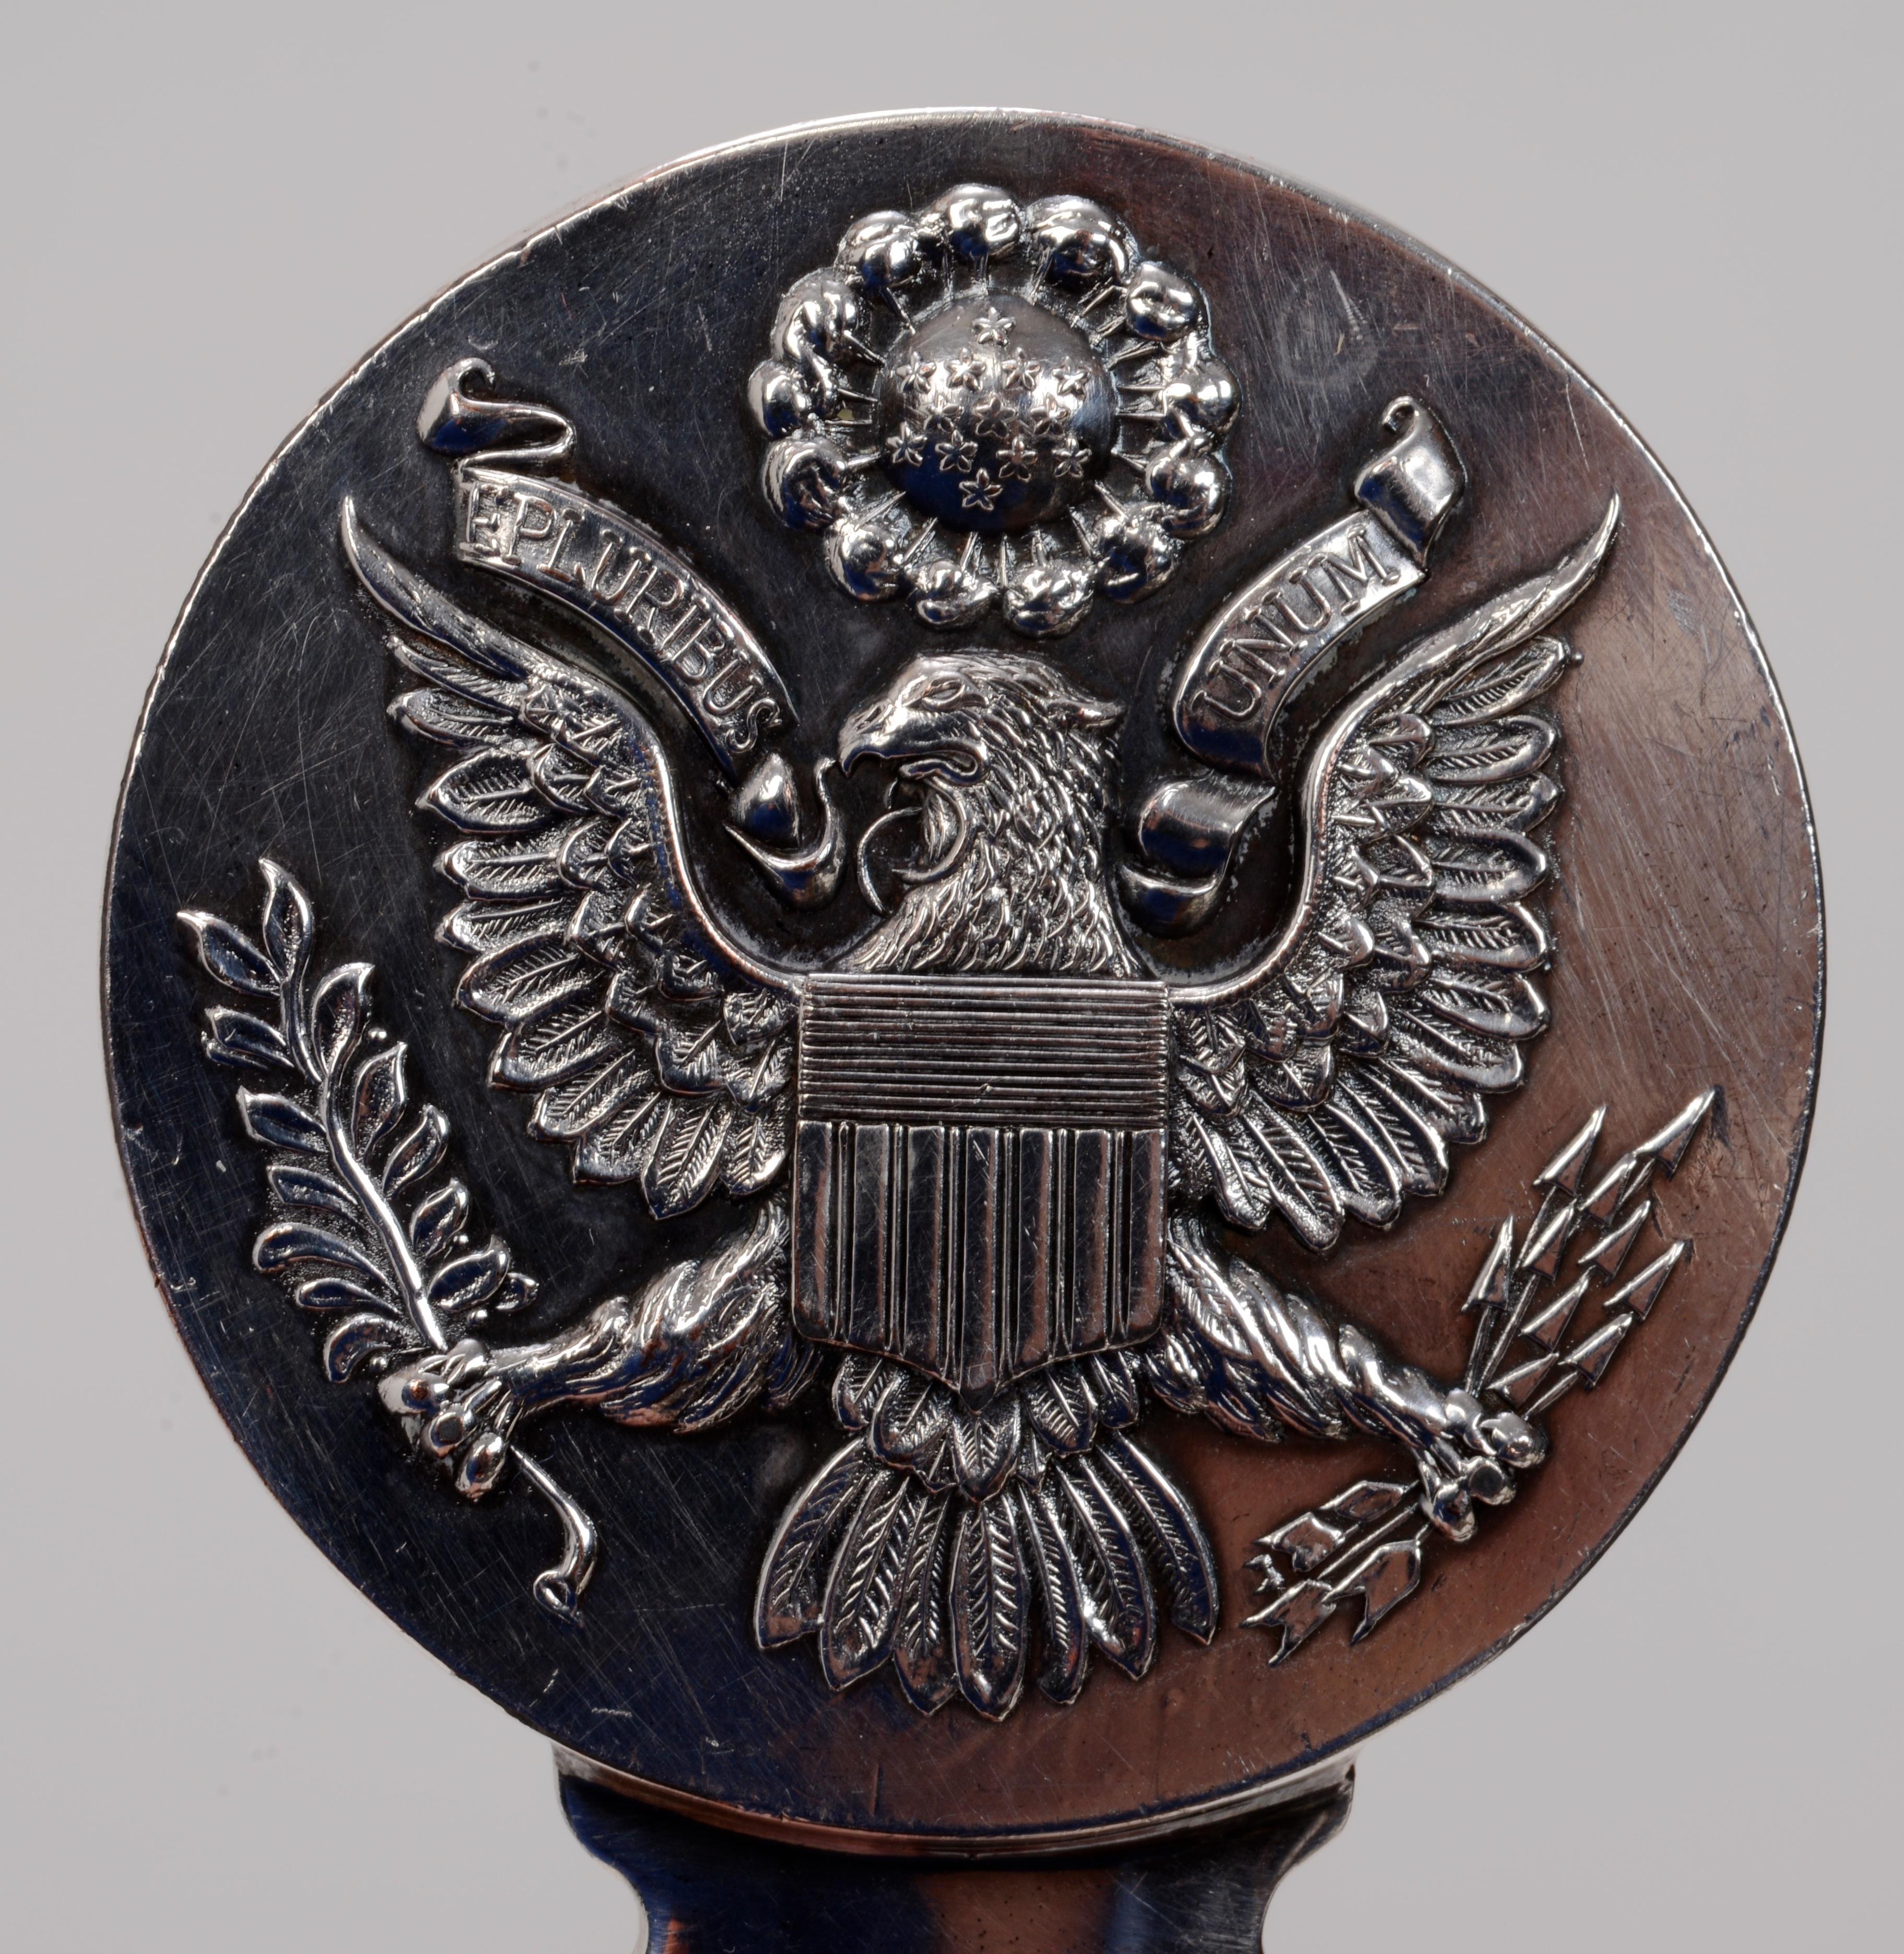 Vintage Christofle Silver Plated Letter Opener, US Eagle Seal, C1960. Given by President John F. Kennedy to Colonel Michael Paul. From the estate of Colonel Paul. Paul Michael Iogolevitch - 1901/1980, later known as Colonel Michael Paul was a